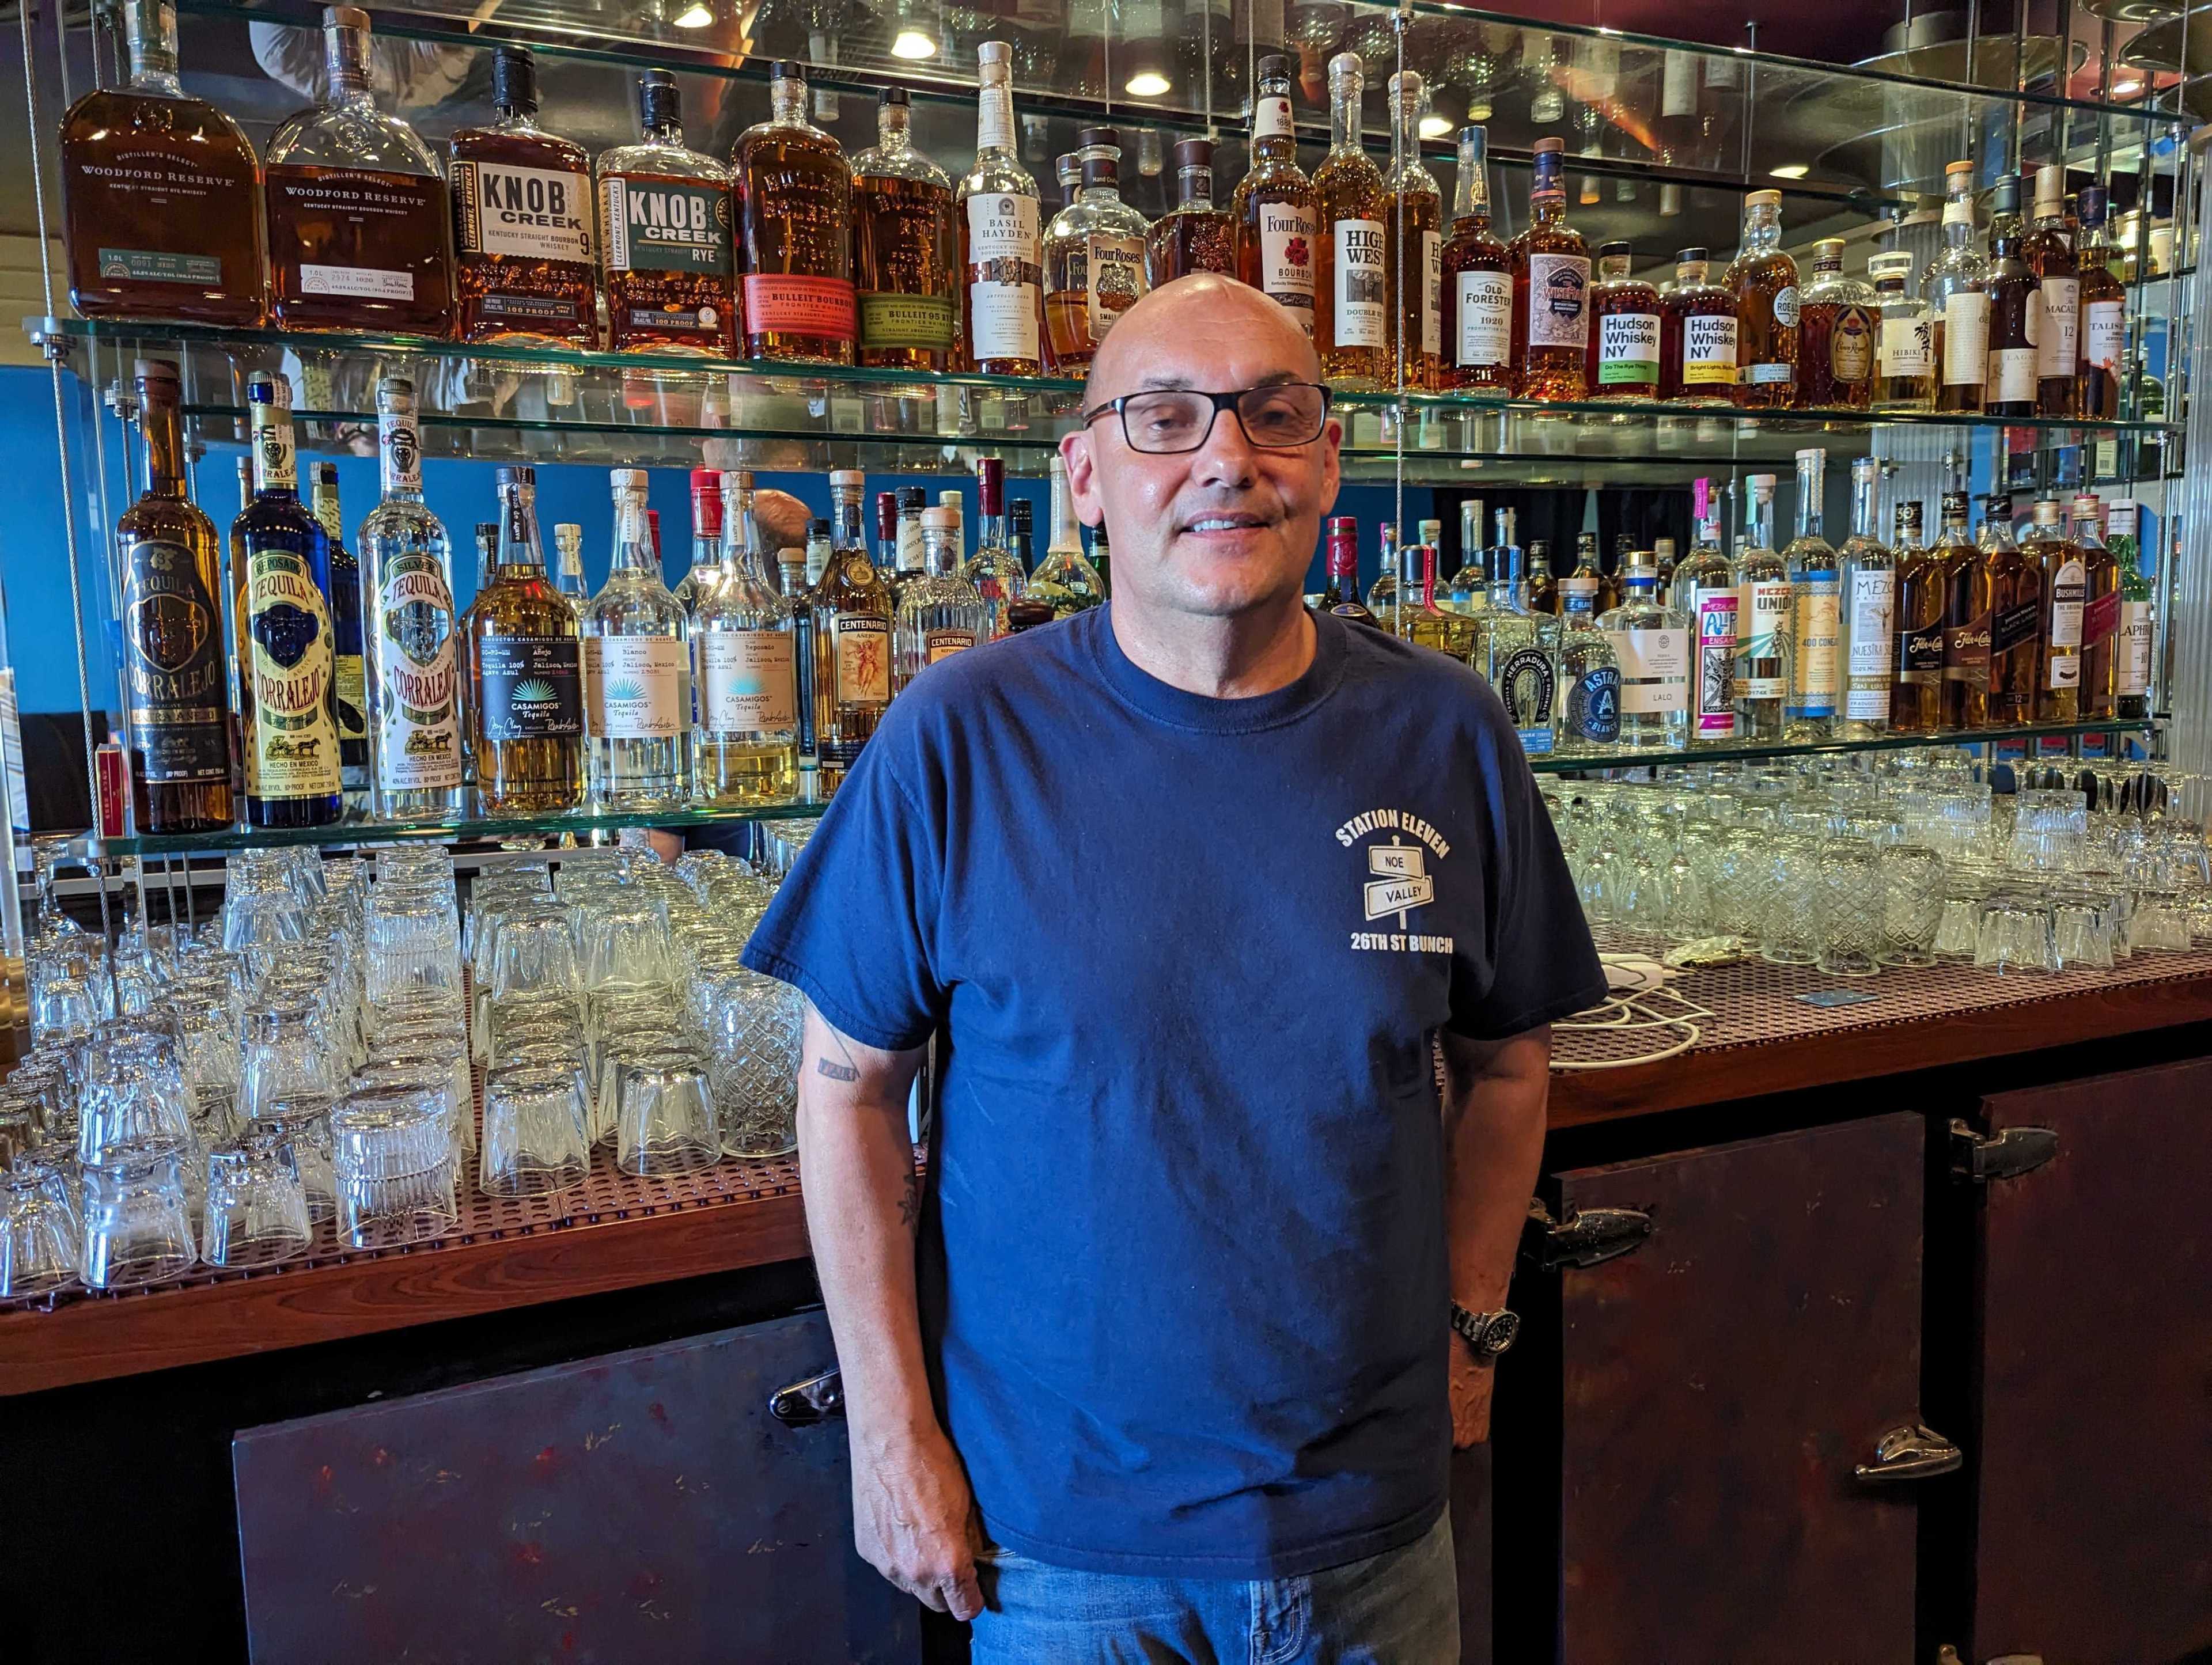 Jeremy Paz stands behind the bar at his soon-to-open venue.